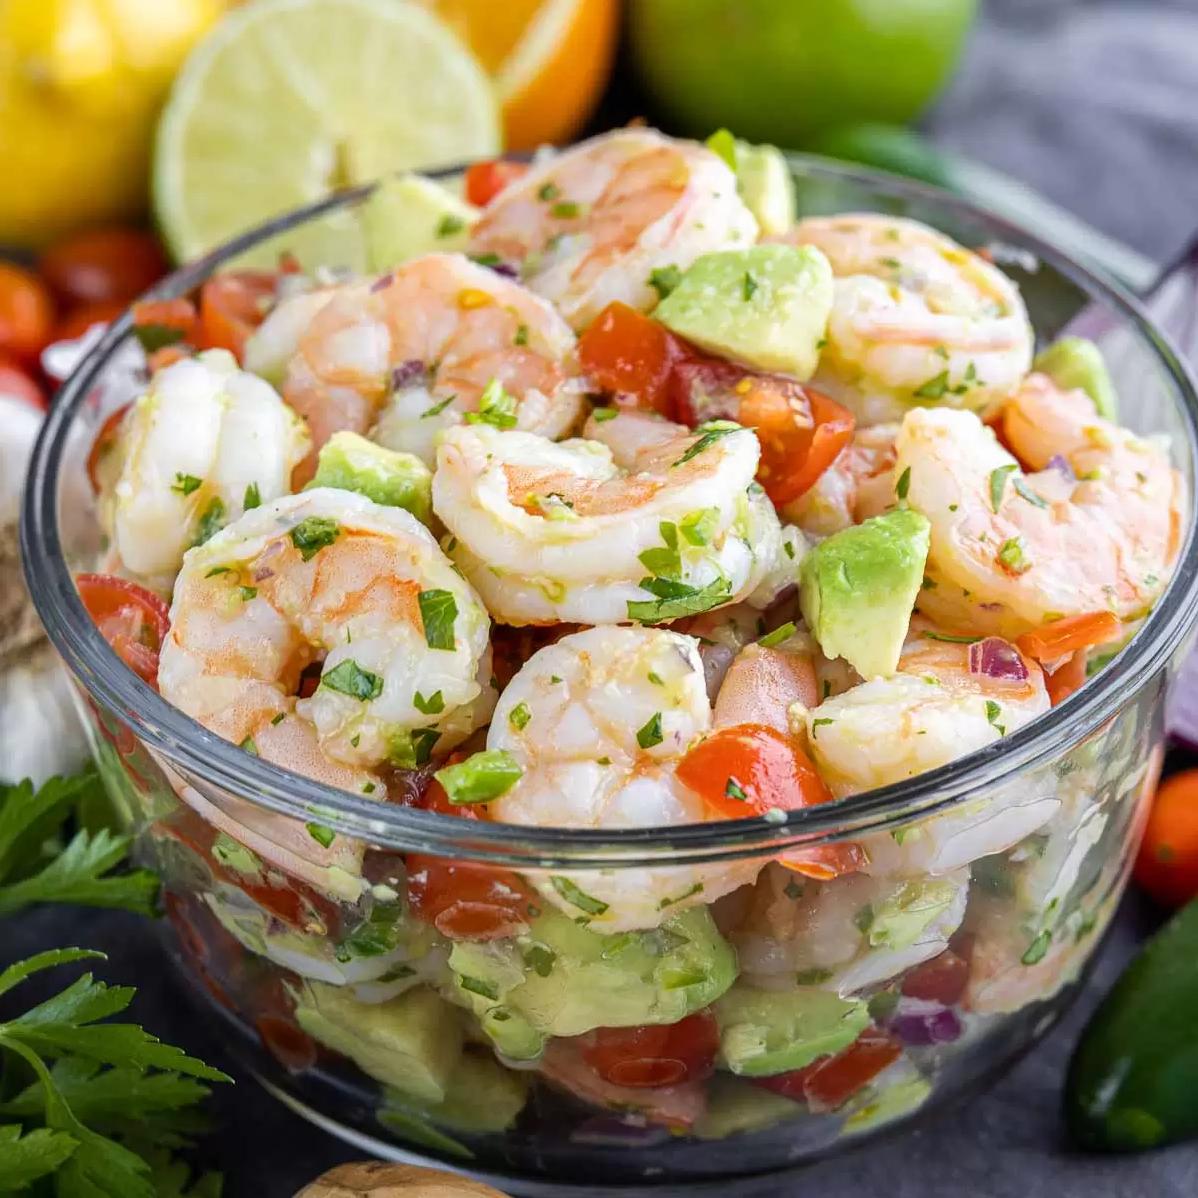  One bite of this Shrimp Ceviche and you'll feel like you're lounging on a beach in Rio.